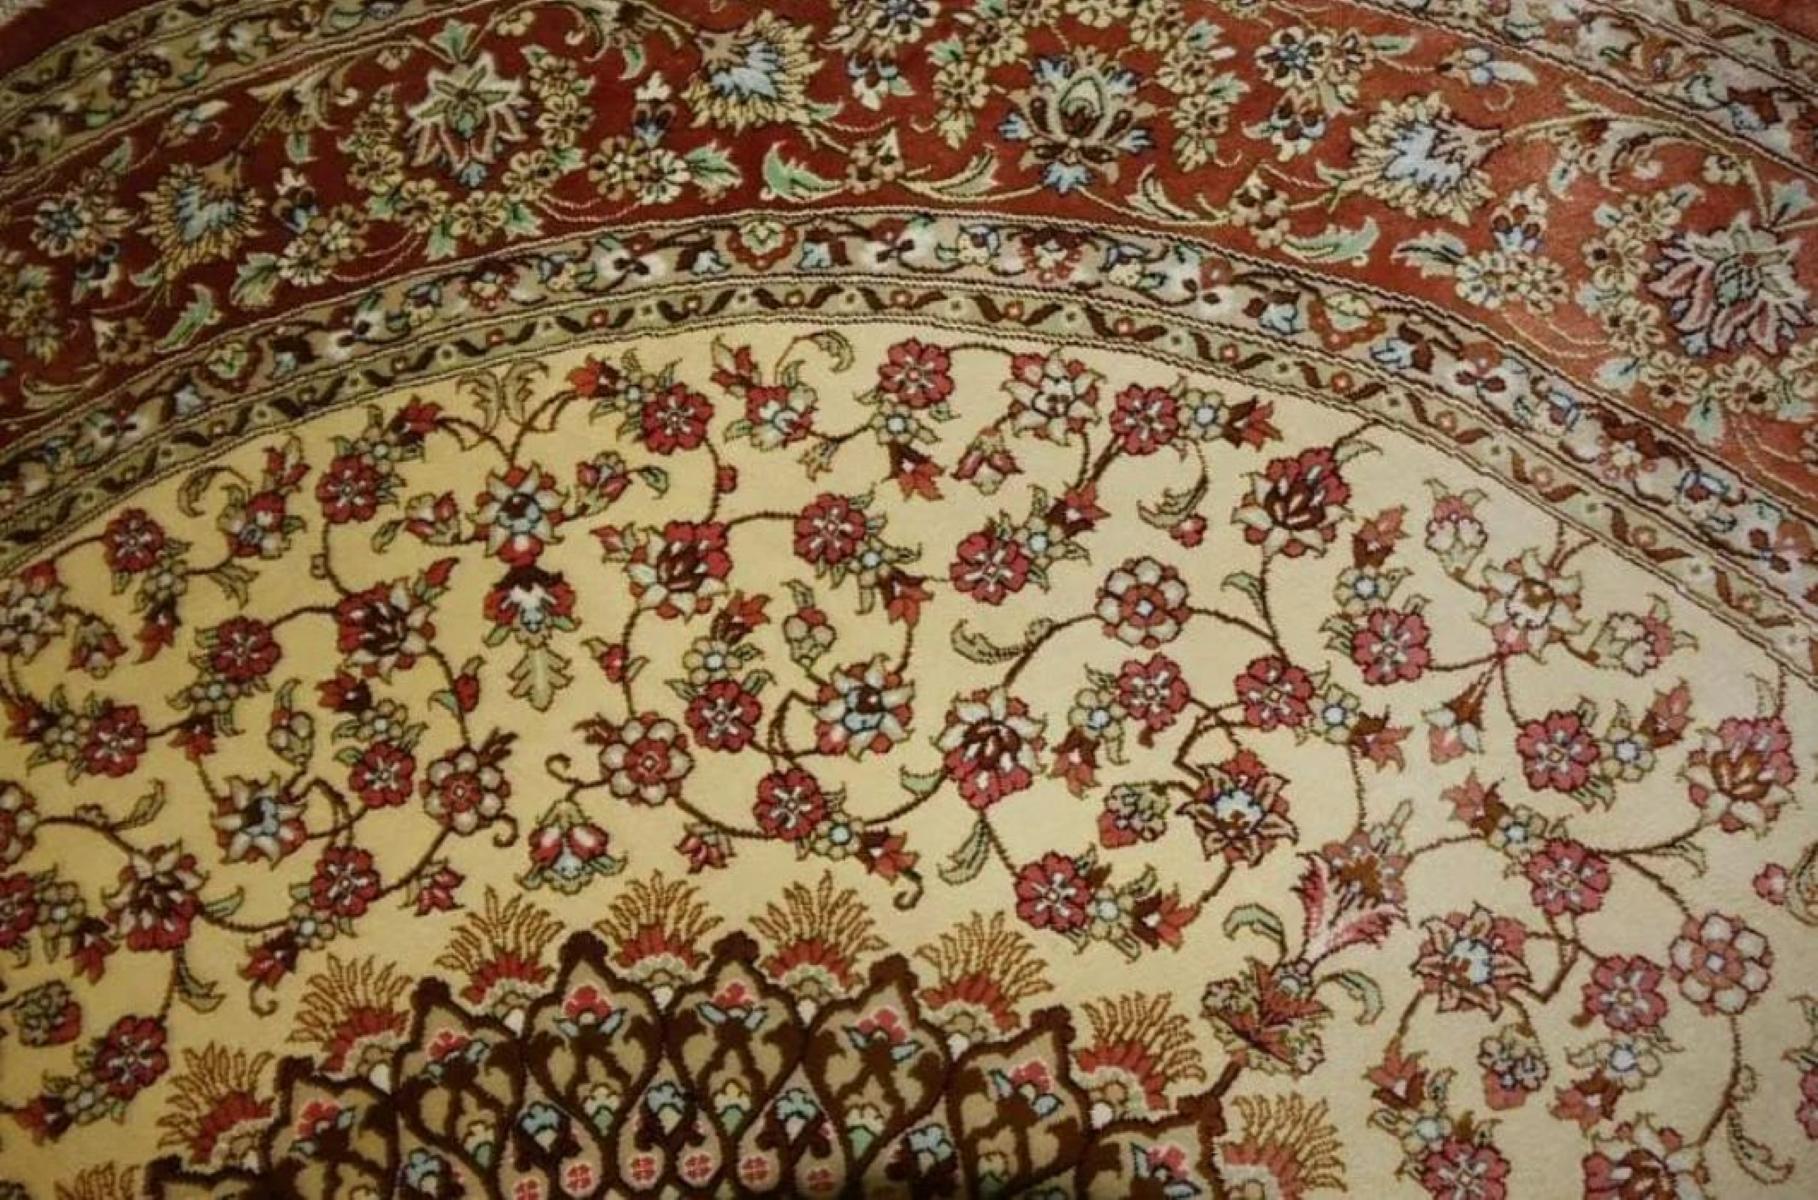 Very fine Persian Silk Qum Rug - 5' x 5' In Excellent Condition For Sale In Newmanstown, PA